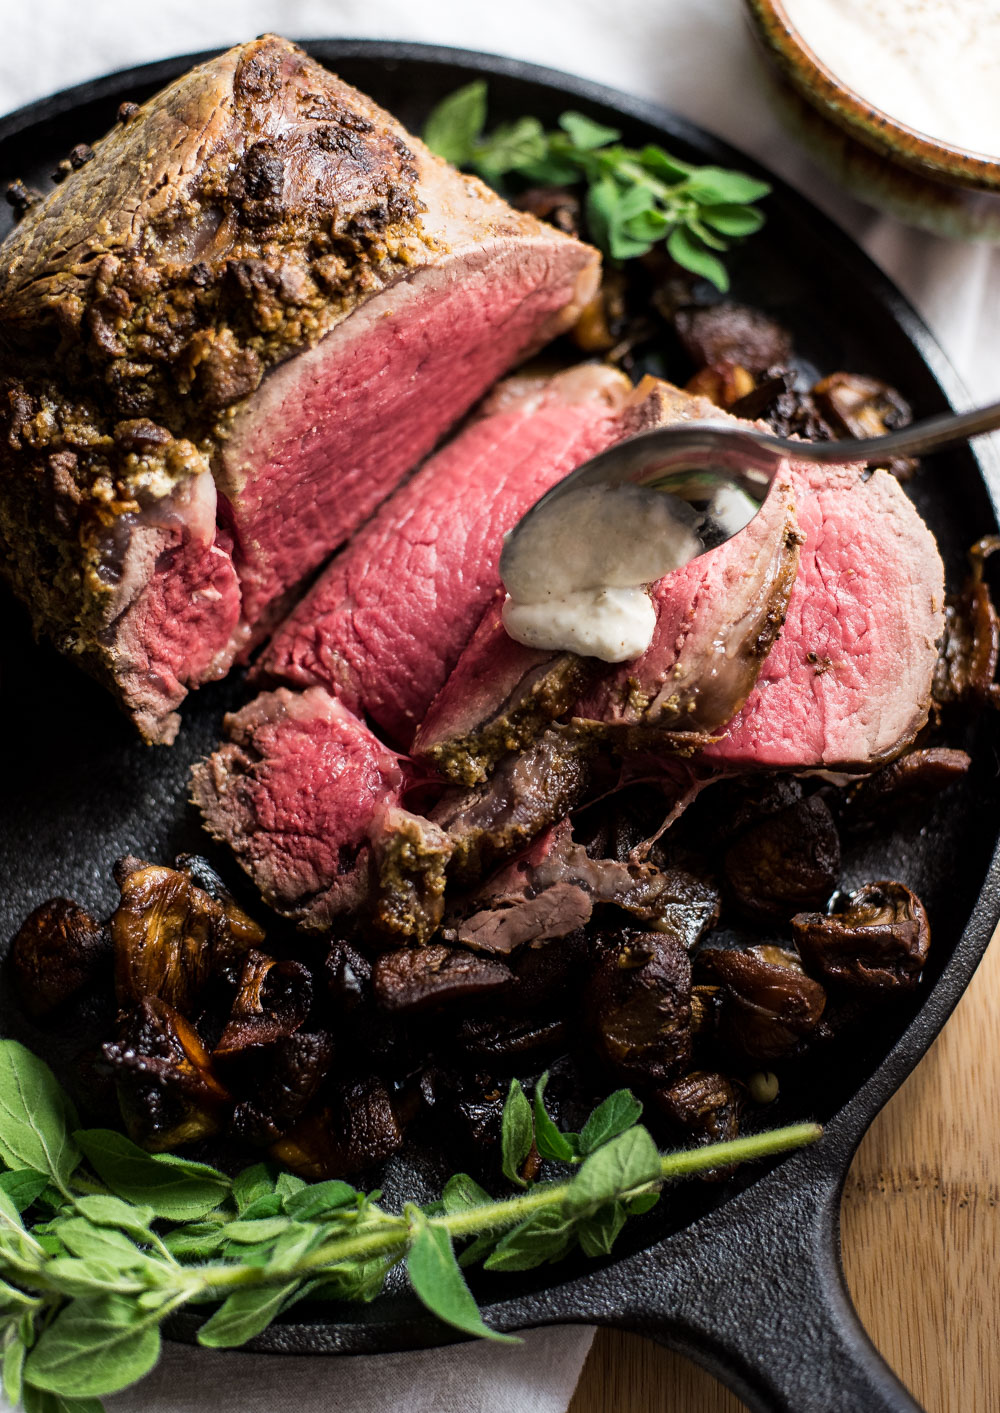 Here is a roasted beef tenderloin recipe like you've never seen before! It's adorned with pilsner mushrooms and the perfect beer horseradish sauce!